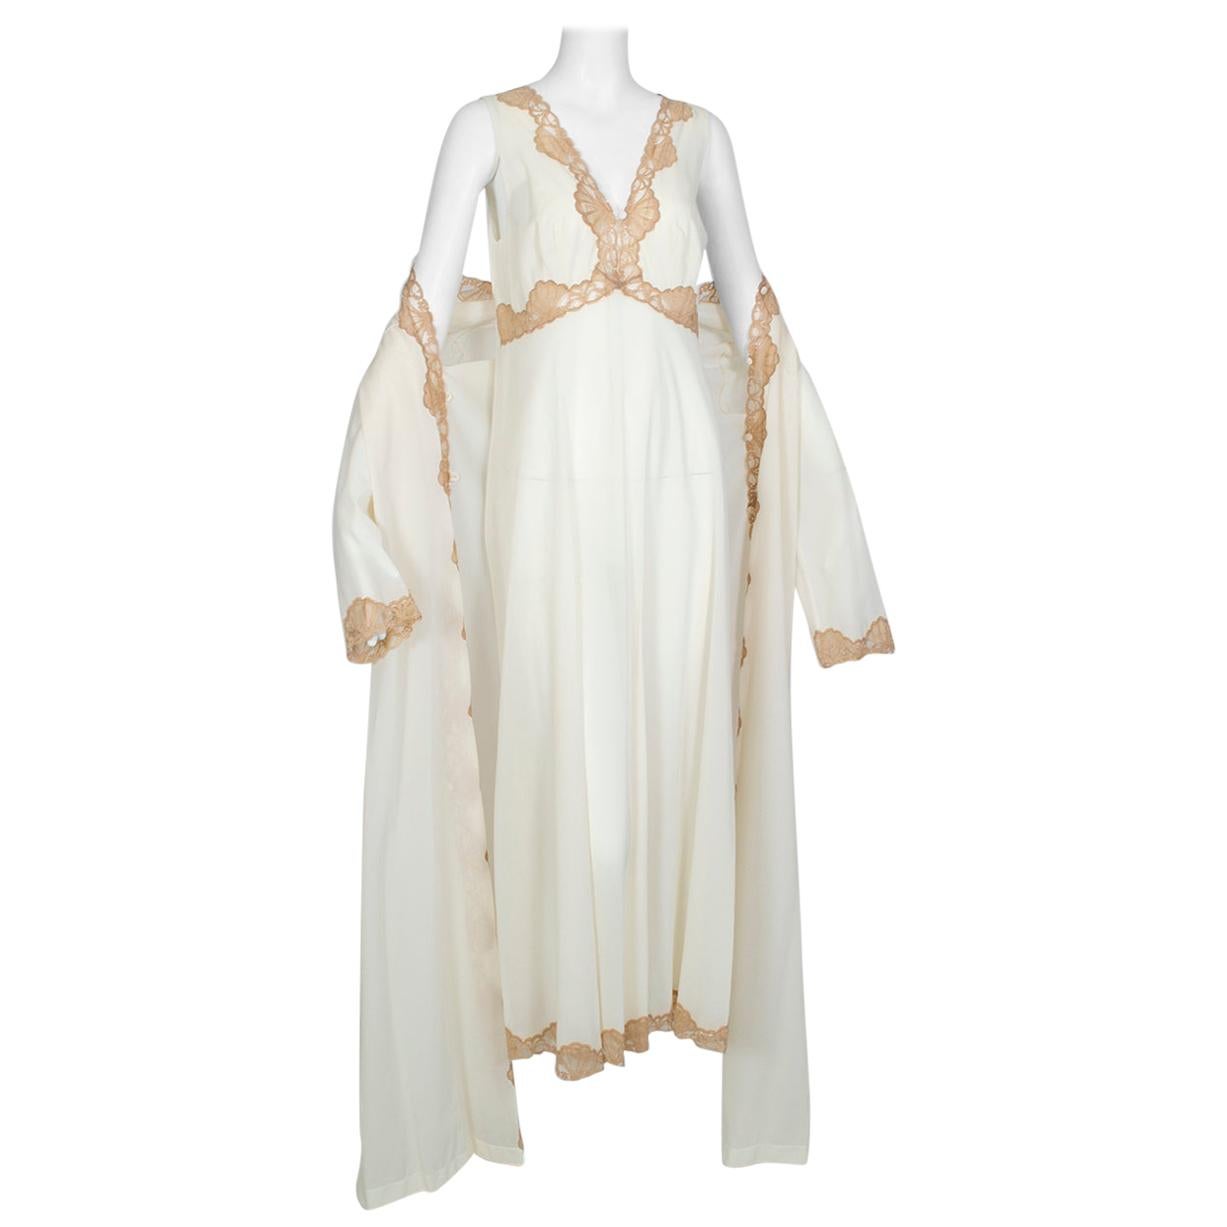 Emilio Pucci Formfit Rogers Ivory Bridal Peignoir Gown and Robe Set – M, 1960s